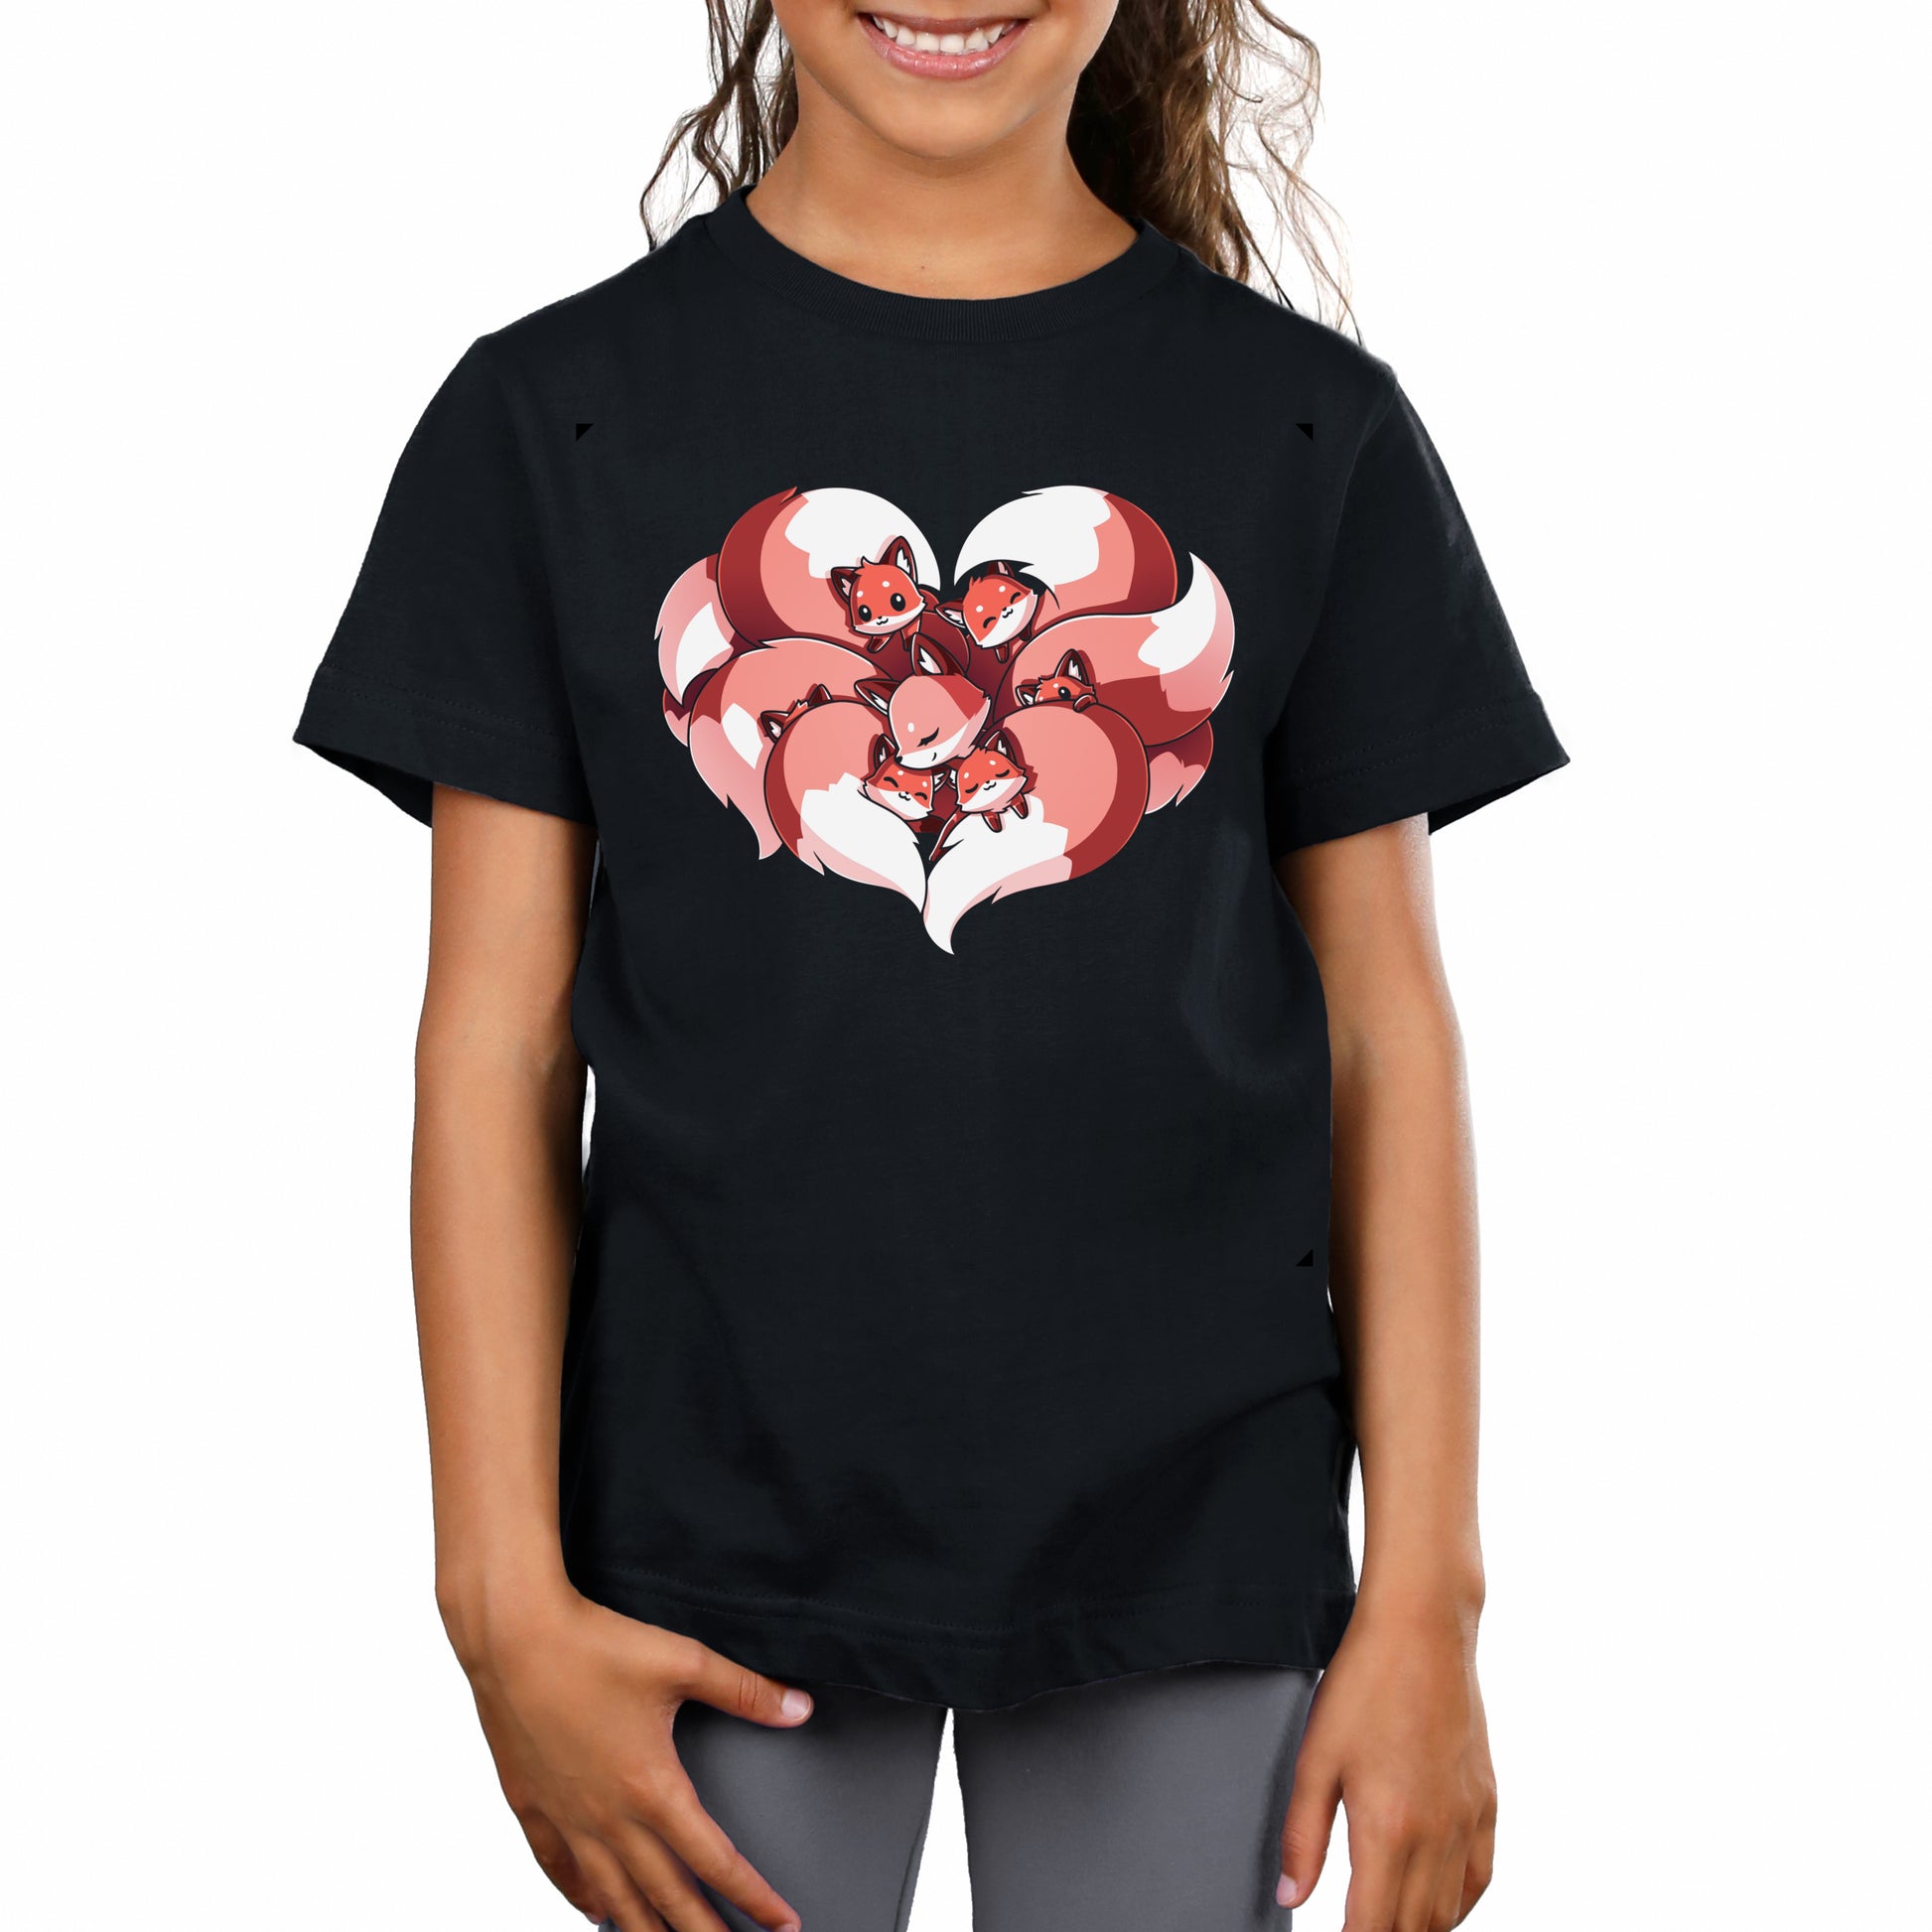 A child wearing a "A Mother's Love" t-shirt by monsterdigital, made from 100% super soft ringspun cotton, features a design of three red foxes in a heart shape.